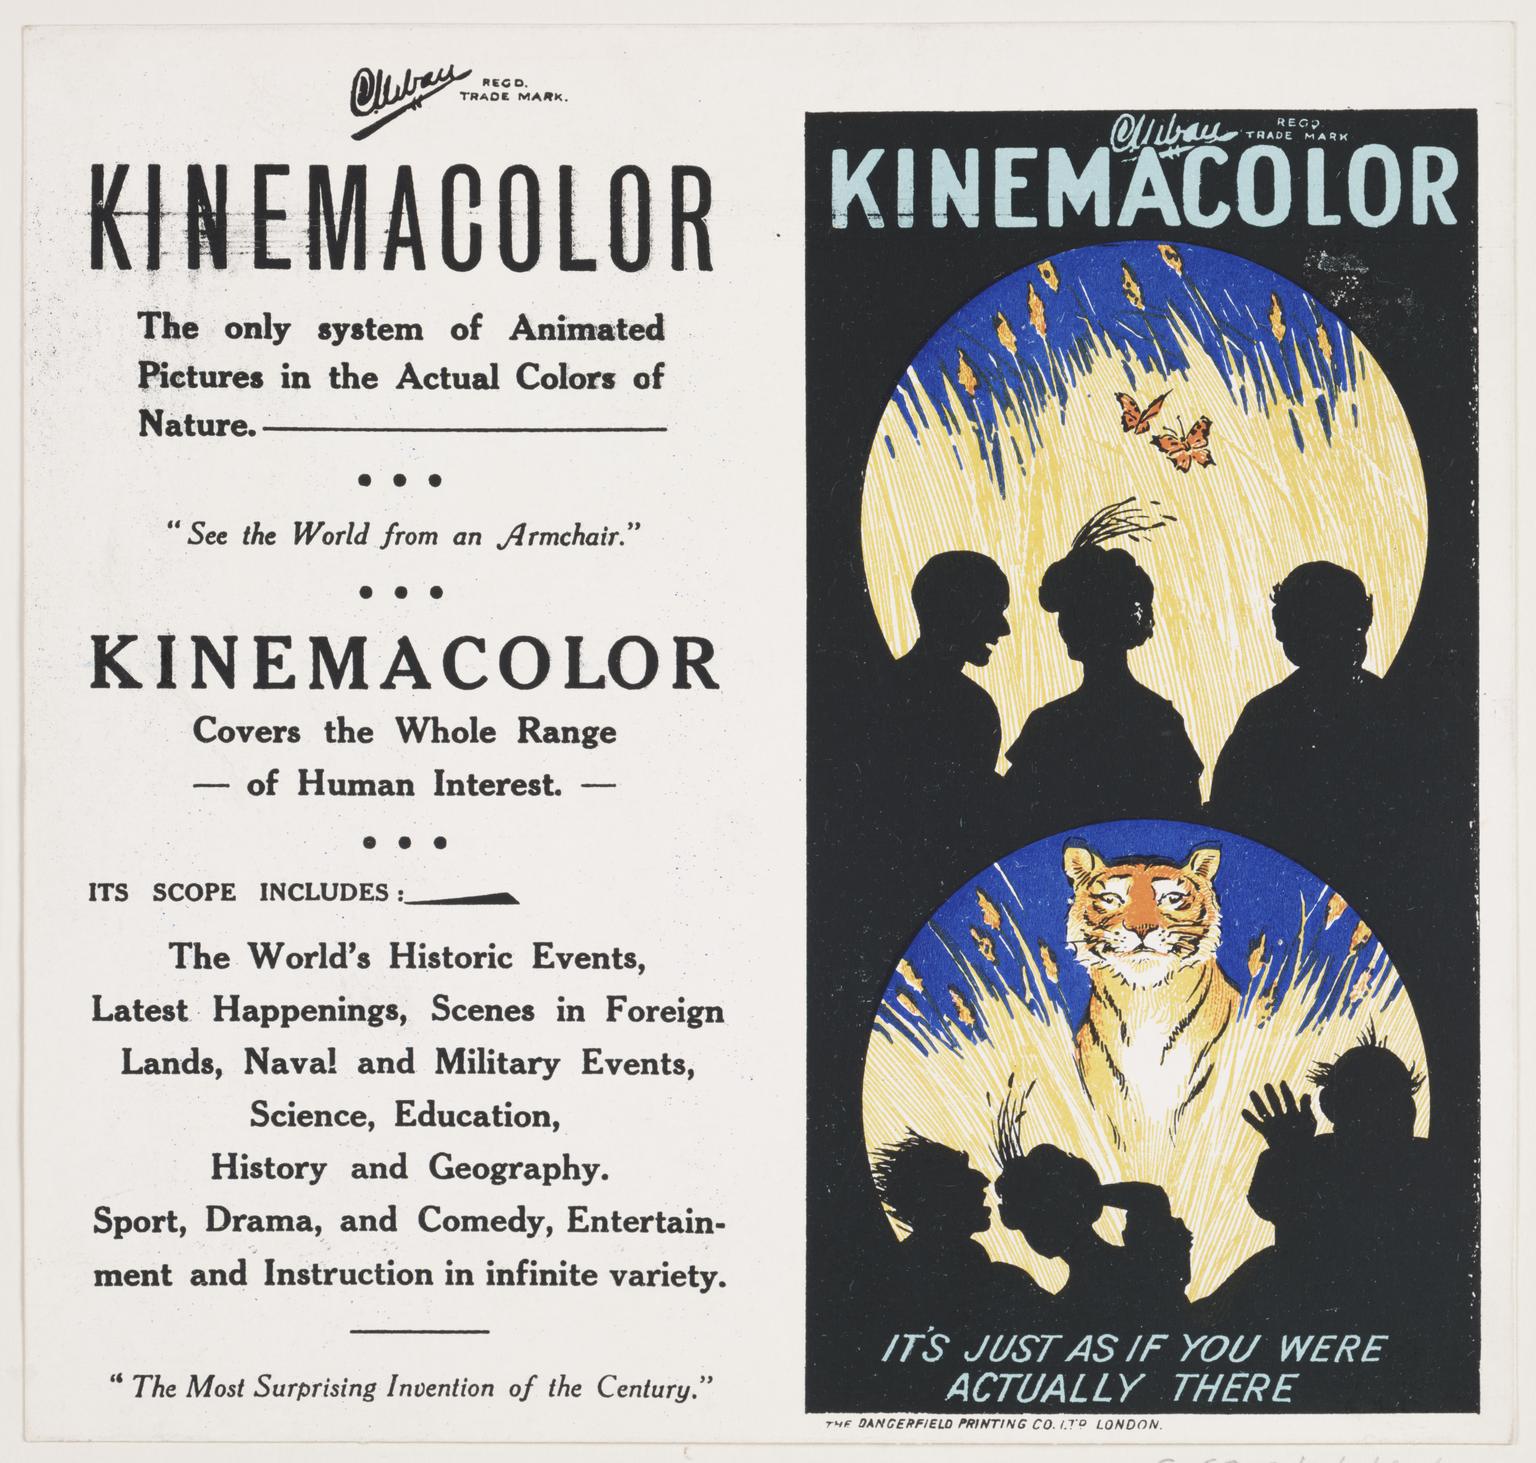 An advertisement for Kinemacolor by the Natural Color Kinematograph Company Ltd